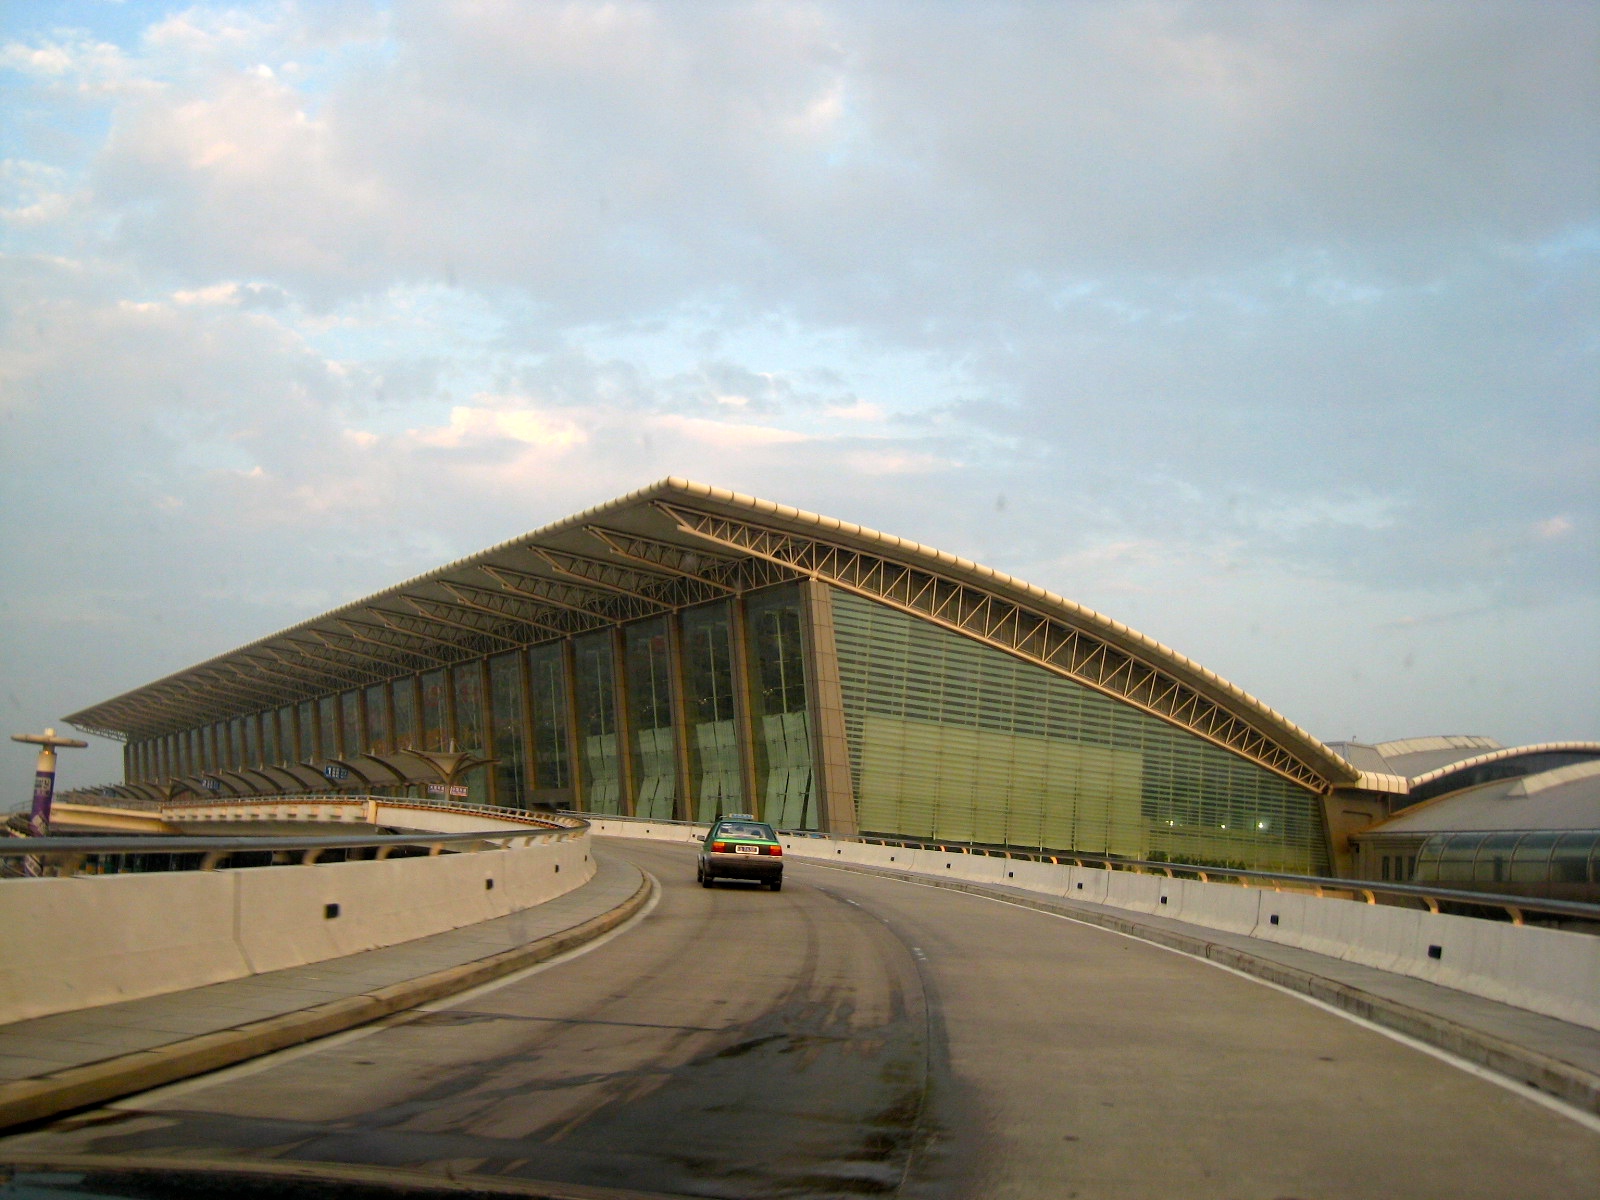 XIY Airport is located 25 km from Xi'an city centre.